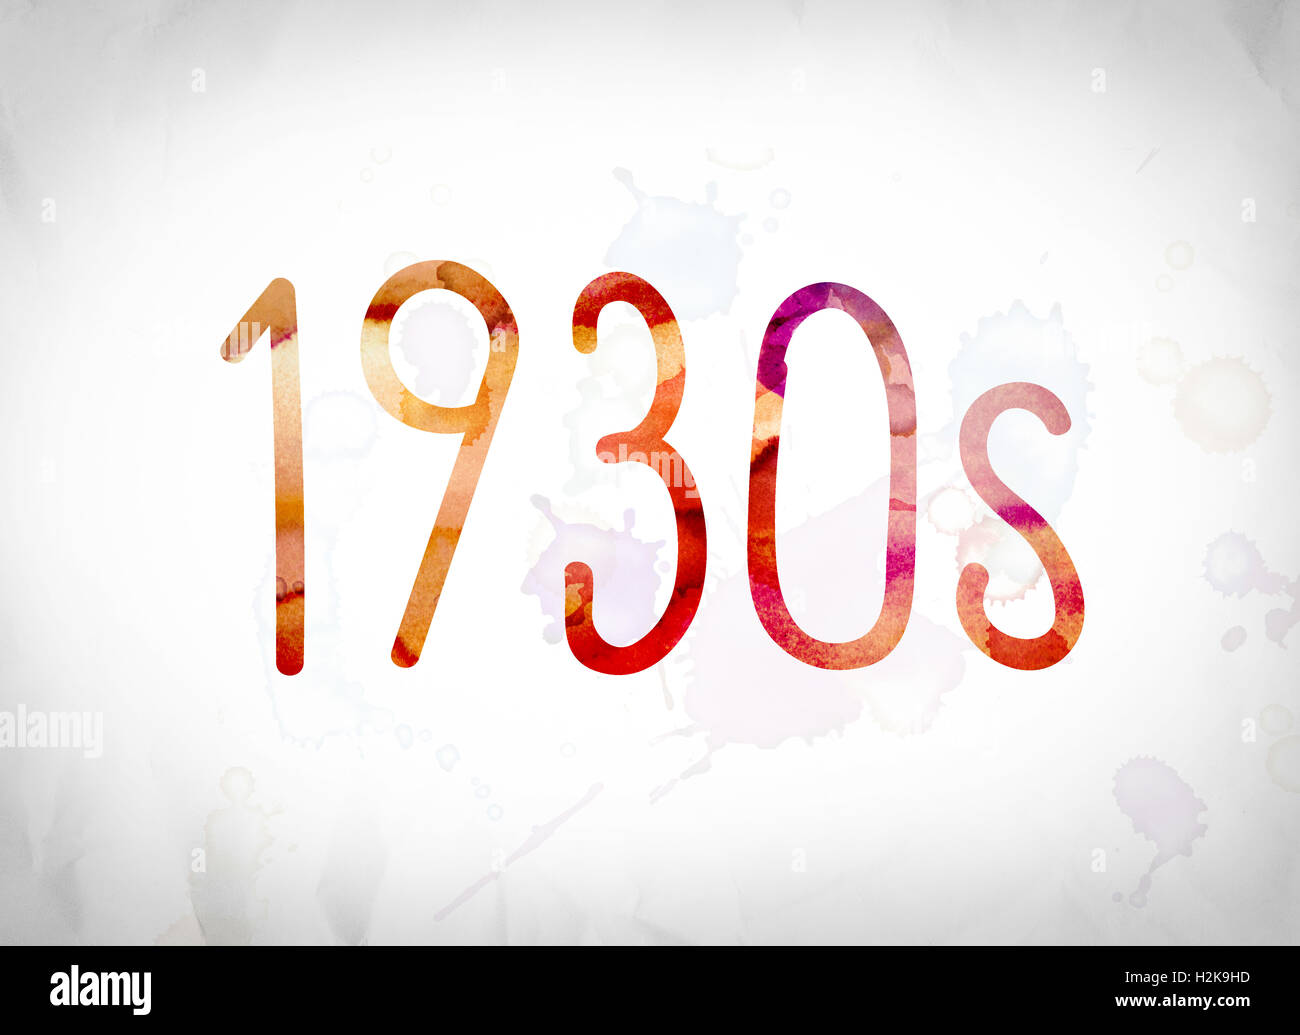 The word '1930s' written in watercolor washes over a white paper background concept and theme. Stock Photo